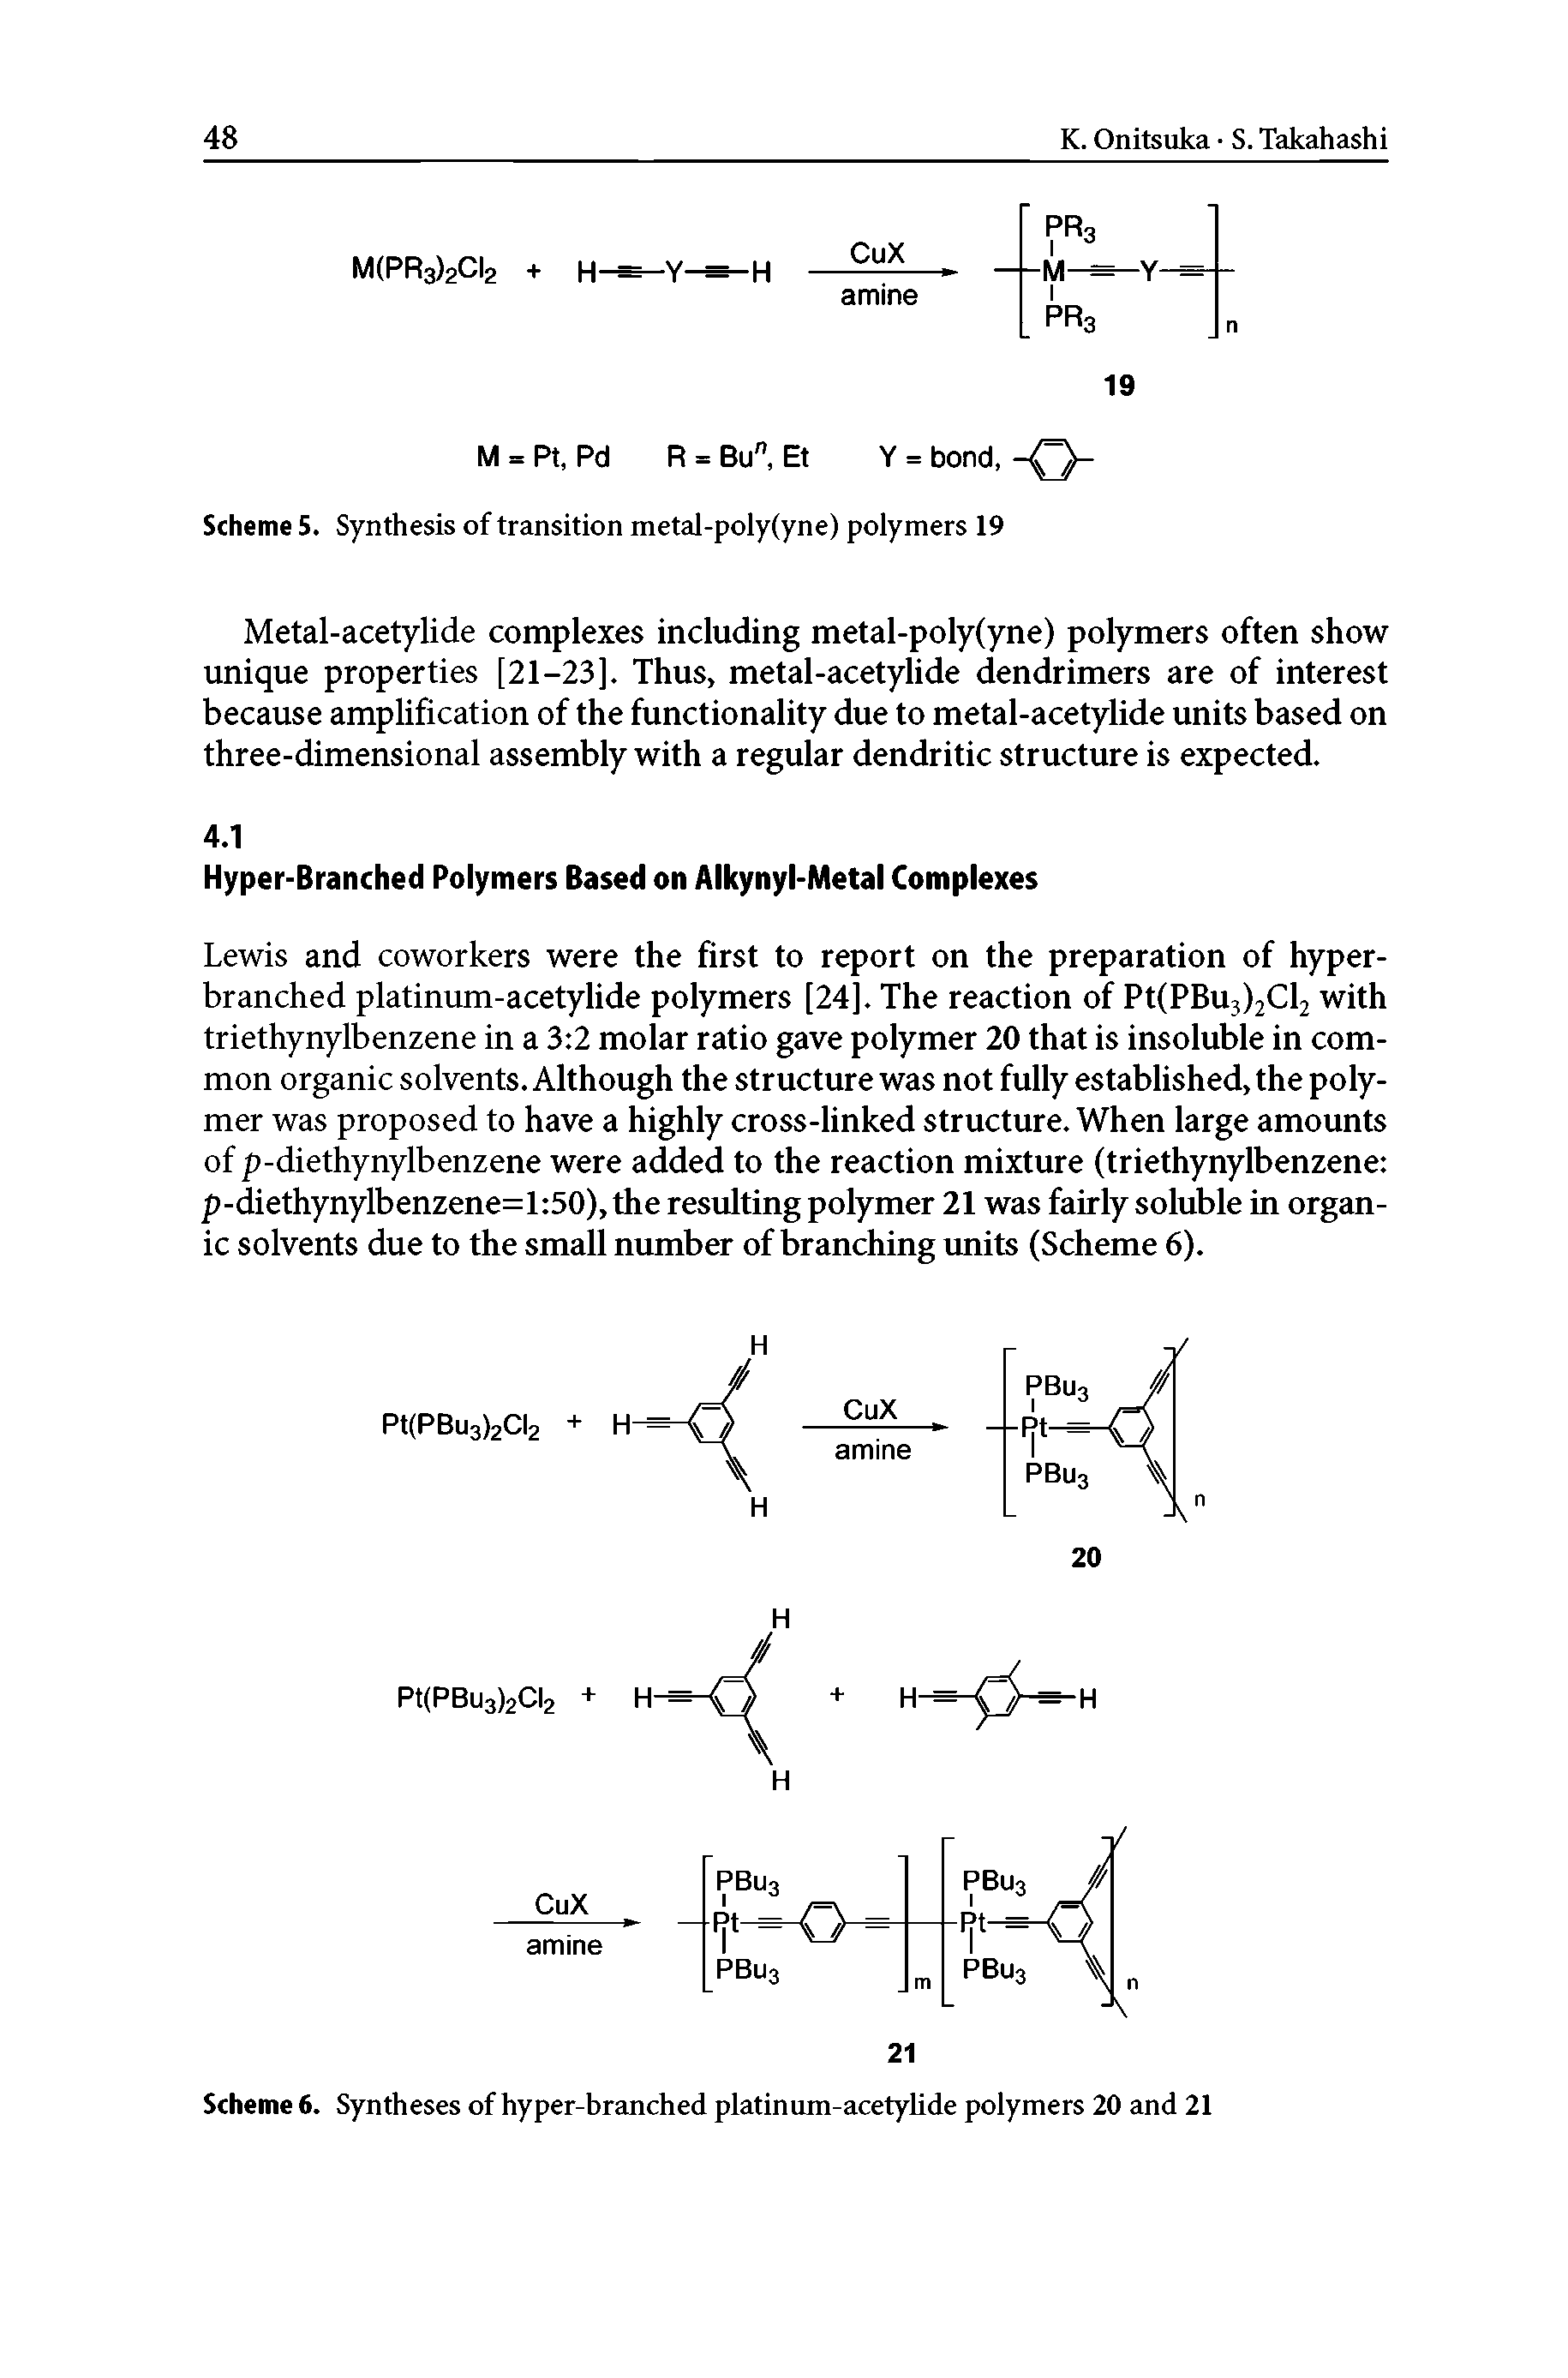 Scheme 6. Syntheses of hyper-branched platinum-acetylide polymers 20 and 21...